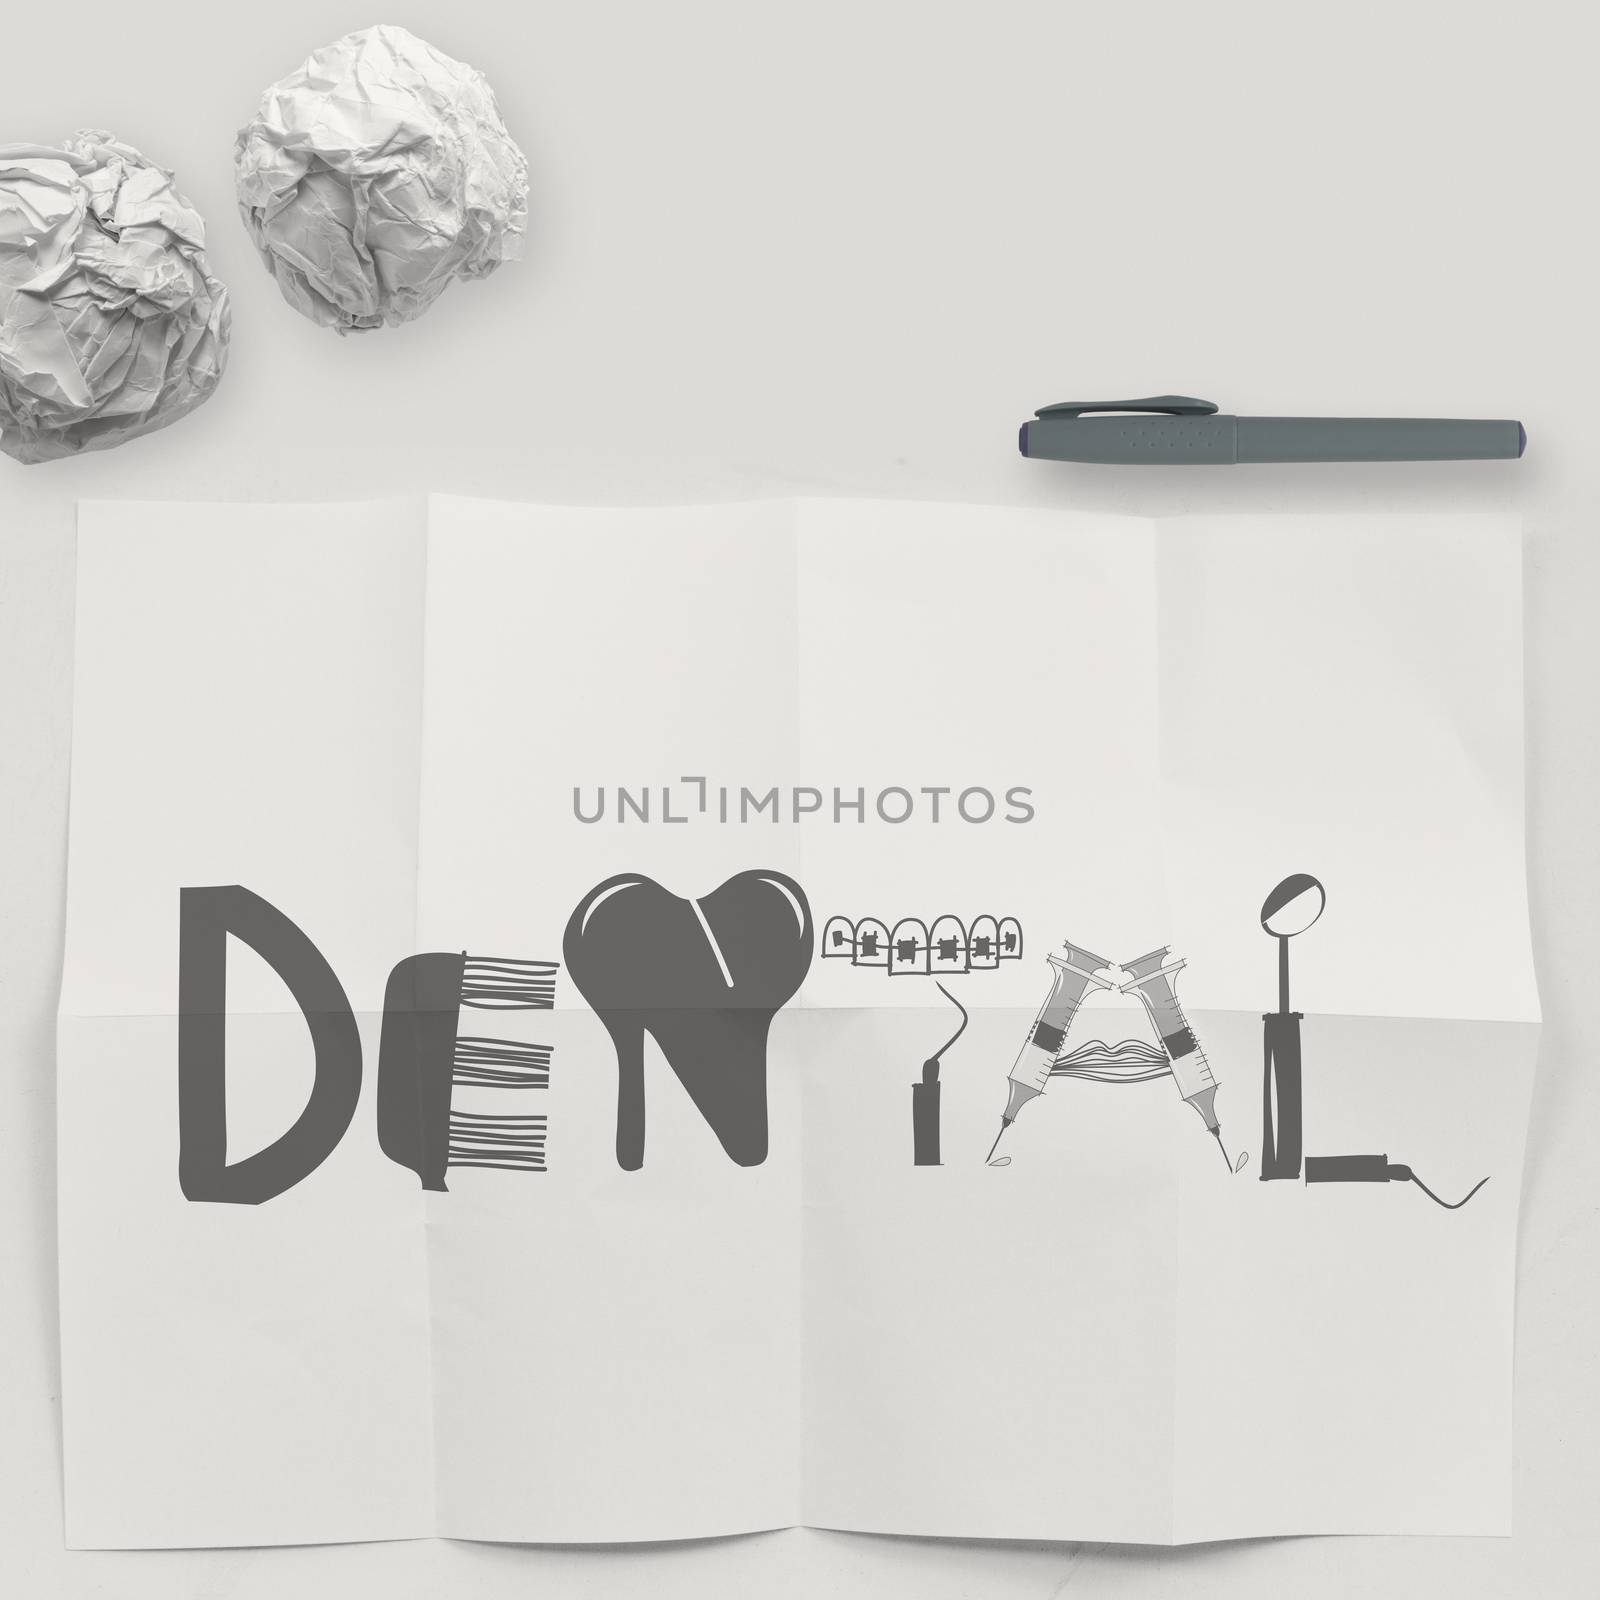 design word DENTAL on white crumpled paper and texture backgroun by everythingpossible